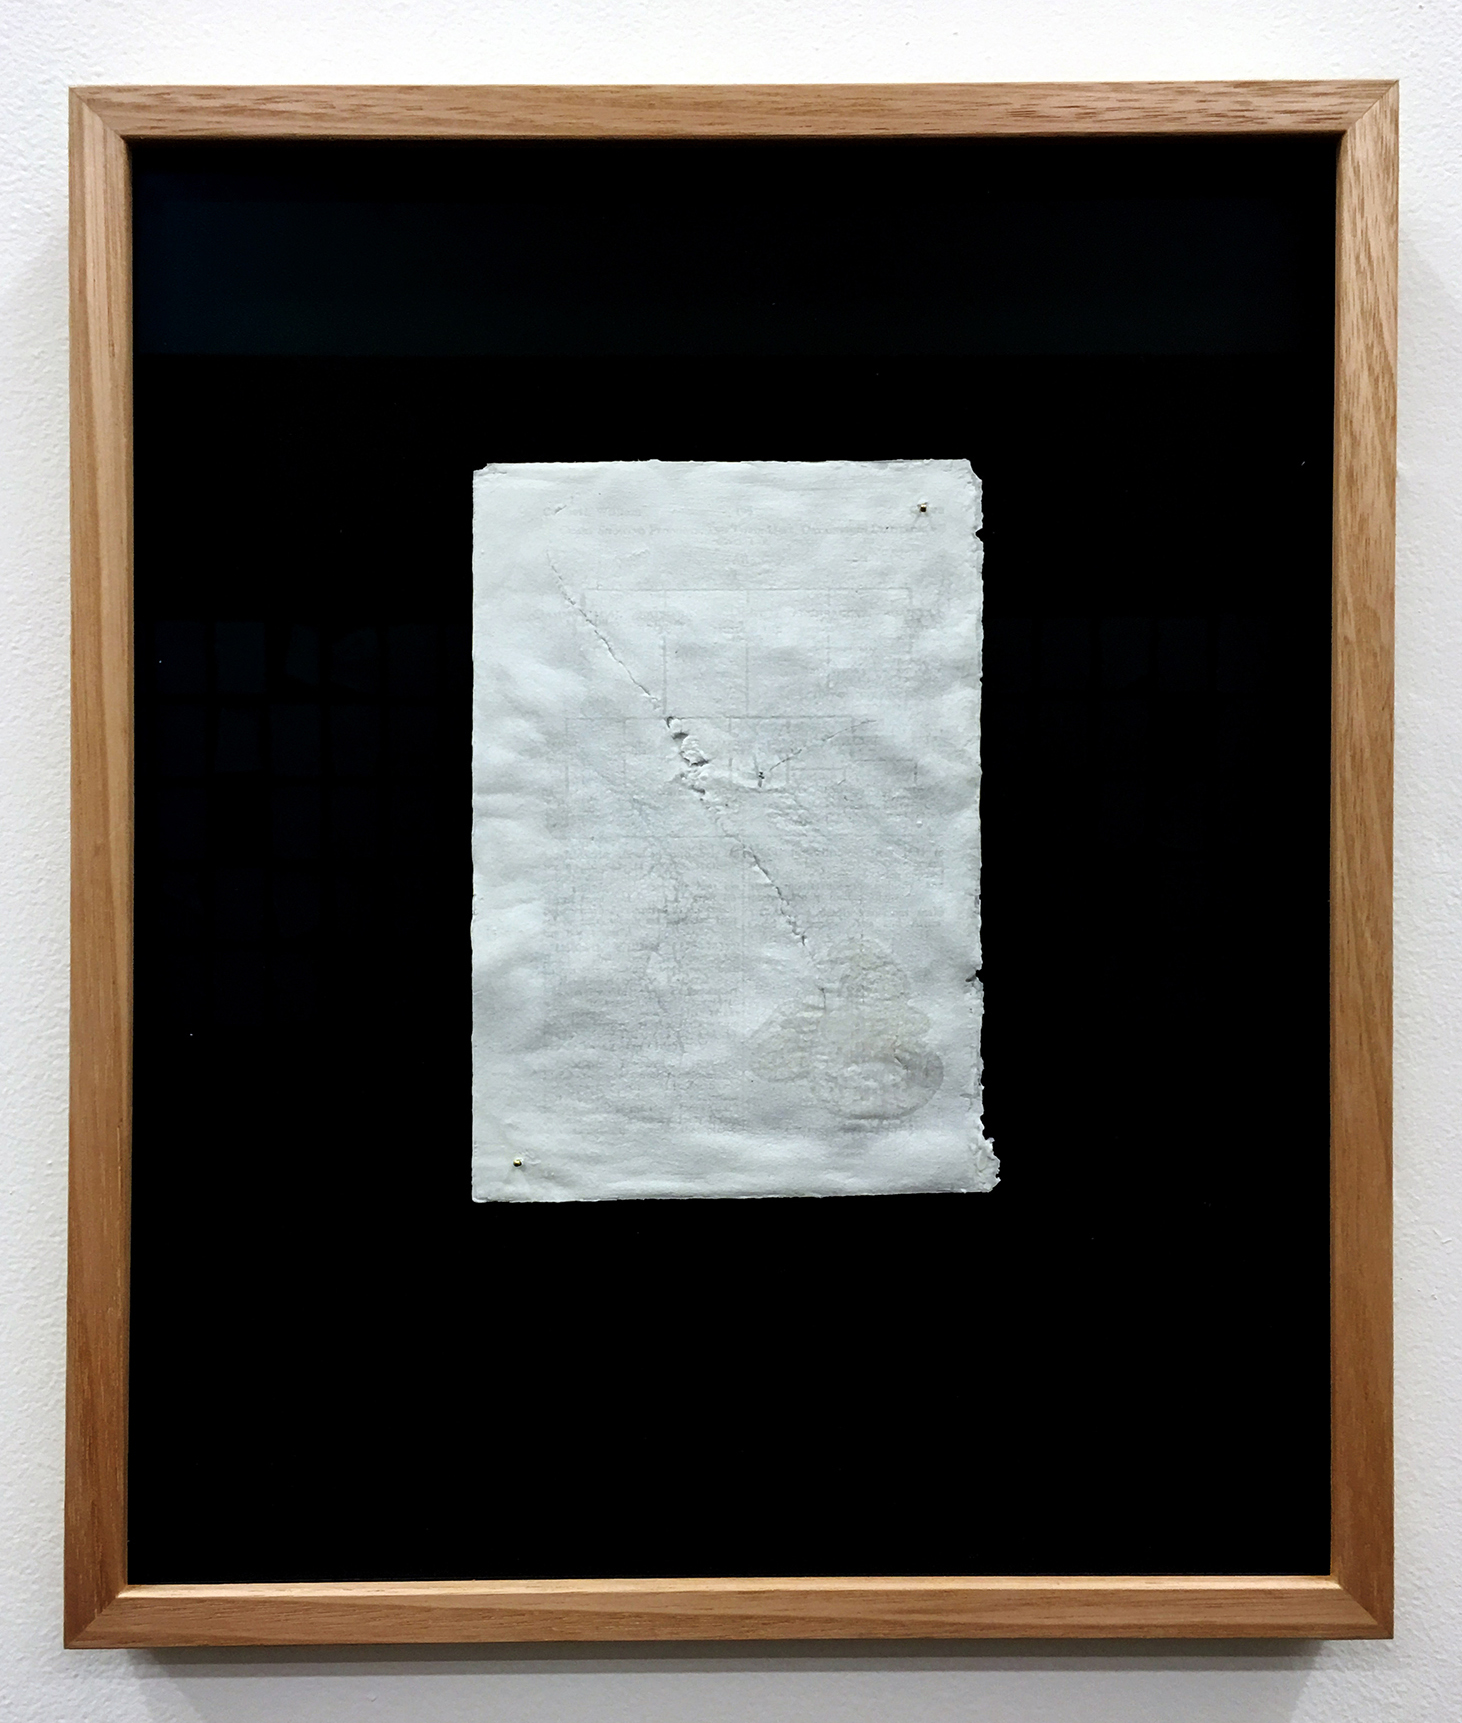   CYRUS TANG   Paper &nbsp;(framed) 2016 Porcelain and paper 35 x 28 cm &nbsp;  